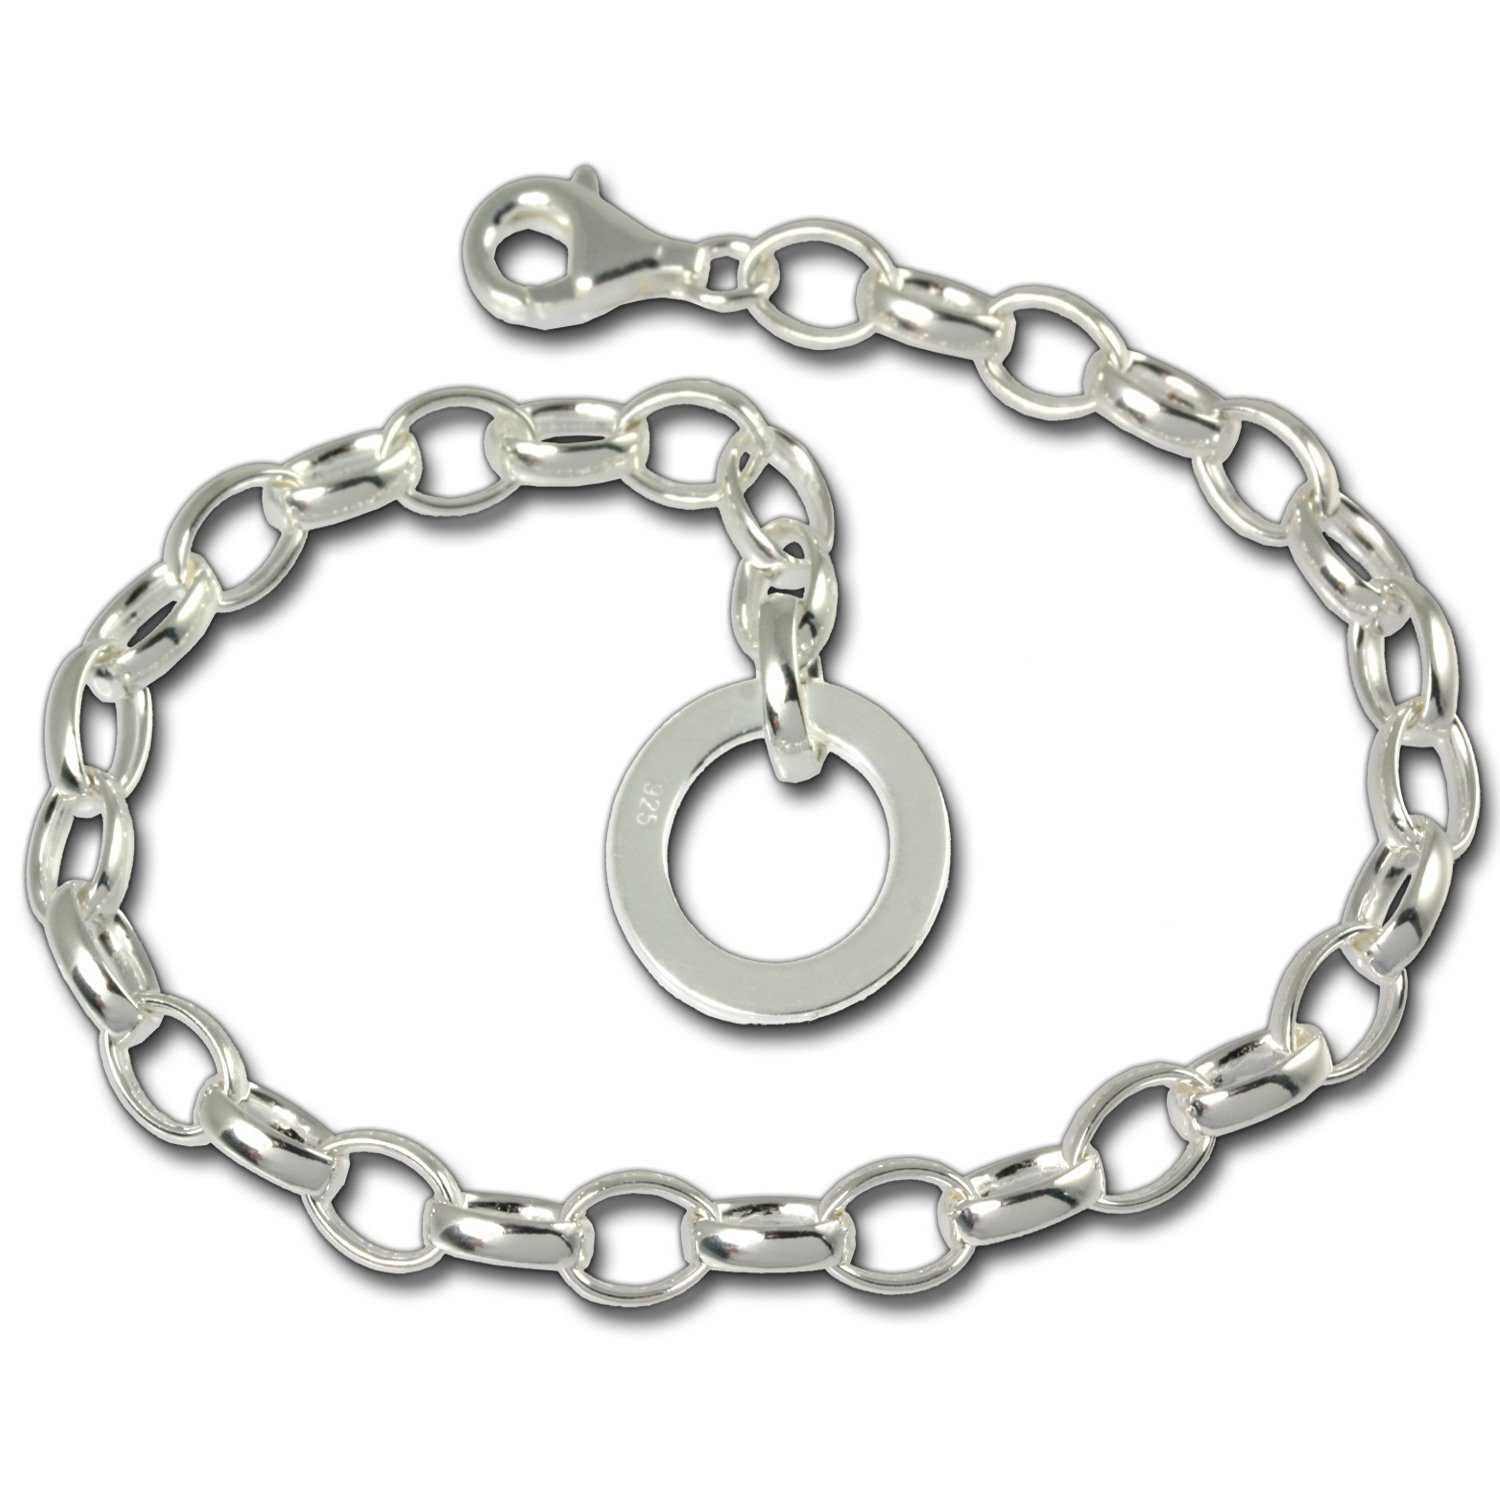 silber, Germany Silber, Charmsarmband, Silber 925 Made-In Farbe: Sterling FC07XA für Charm-Armband SilberDream Charms (Charmsarmbänder), Charmsarmband SilberDream